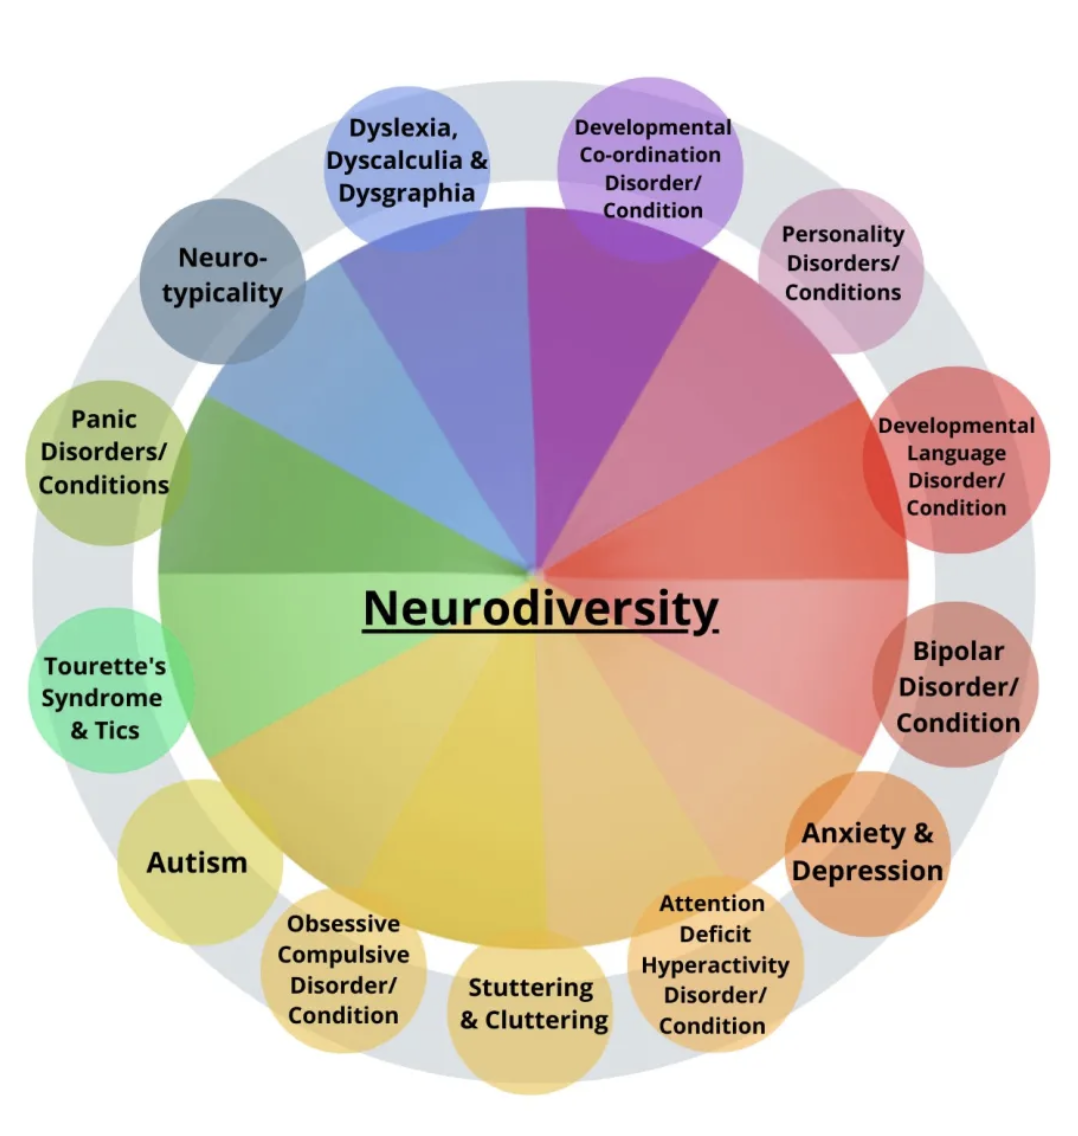 neurodiversity wheel including: Dyslexia, dyscalculia, dysgraphia, developmental co-ordination disorder/condition, developmental language disorder/condition, bipolar disorder/condition, Anxiety and depression, attention deficit  hyperactivity disorder/condition, stuttering and cluttering, obsessive compulsive disorder/condition, autism, tourette's syndrome and tics, panic disorders/conditions, neuro-typicality